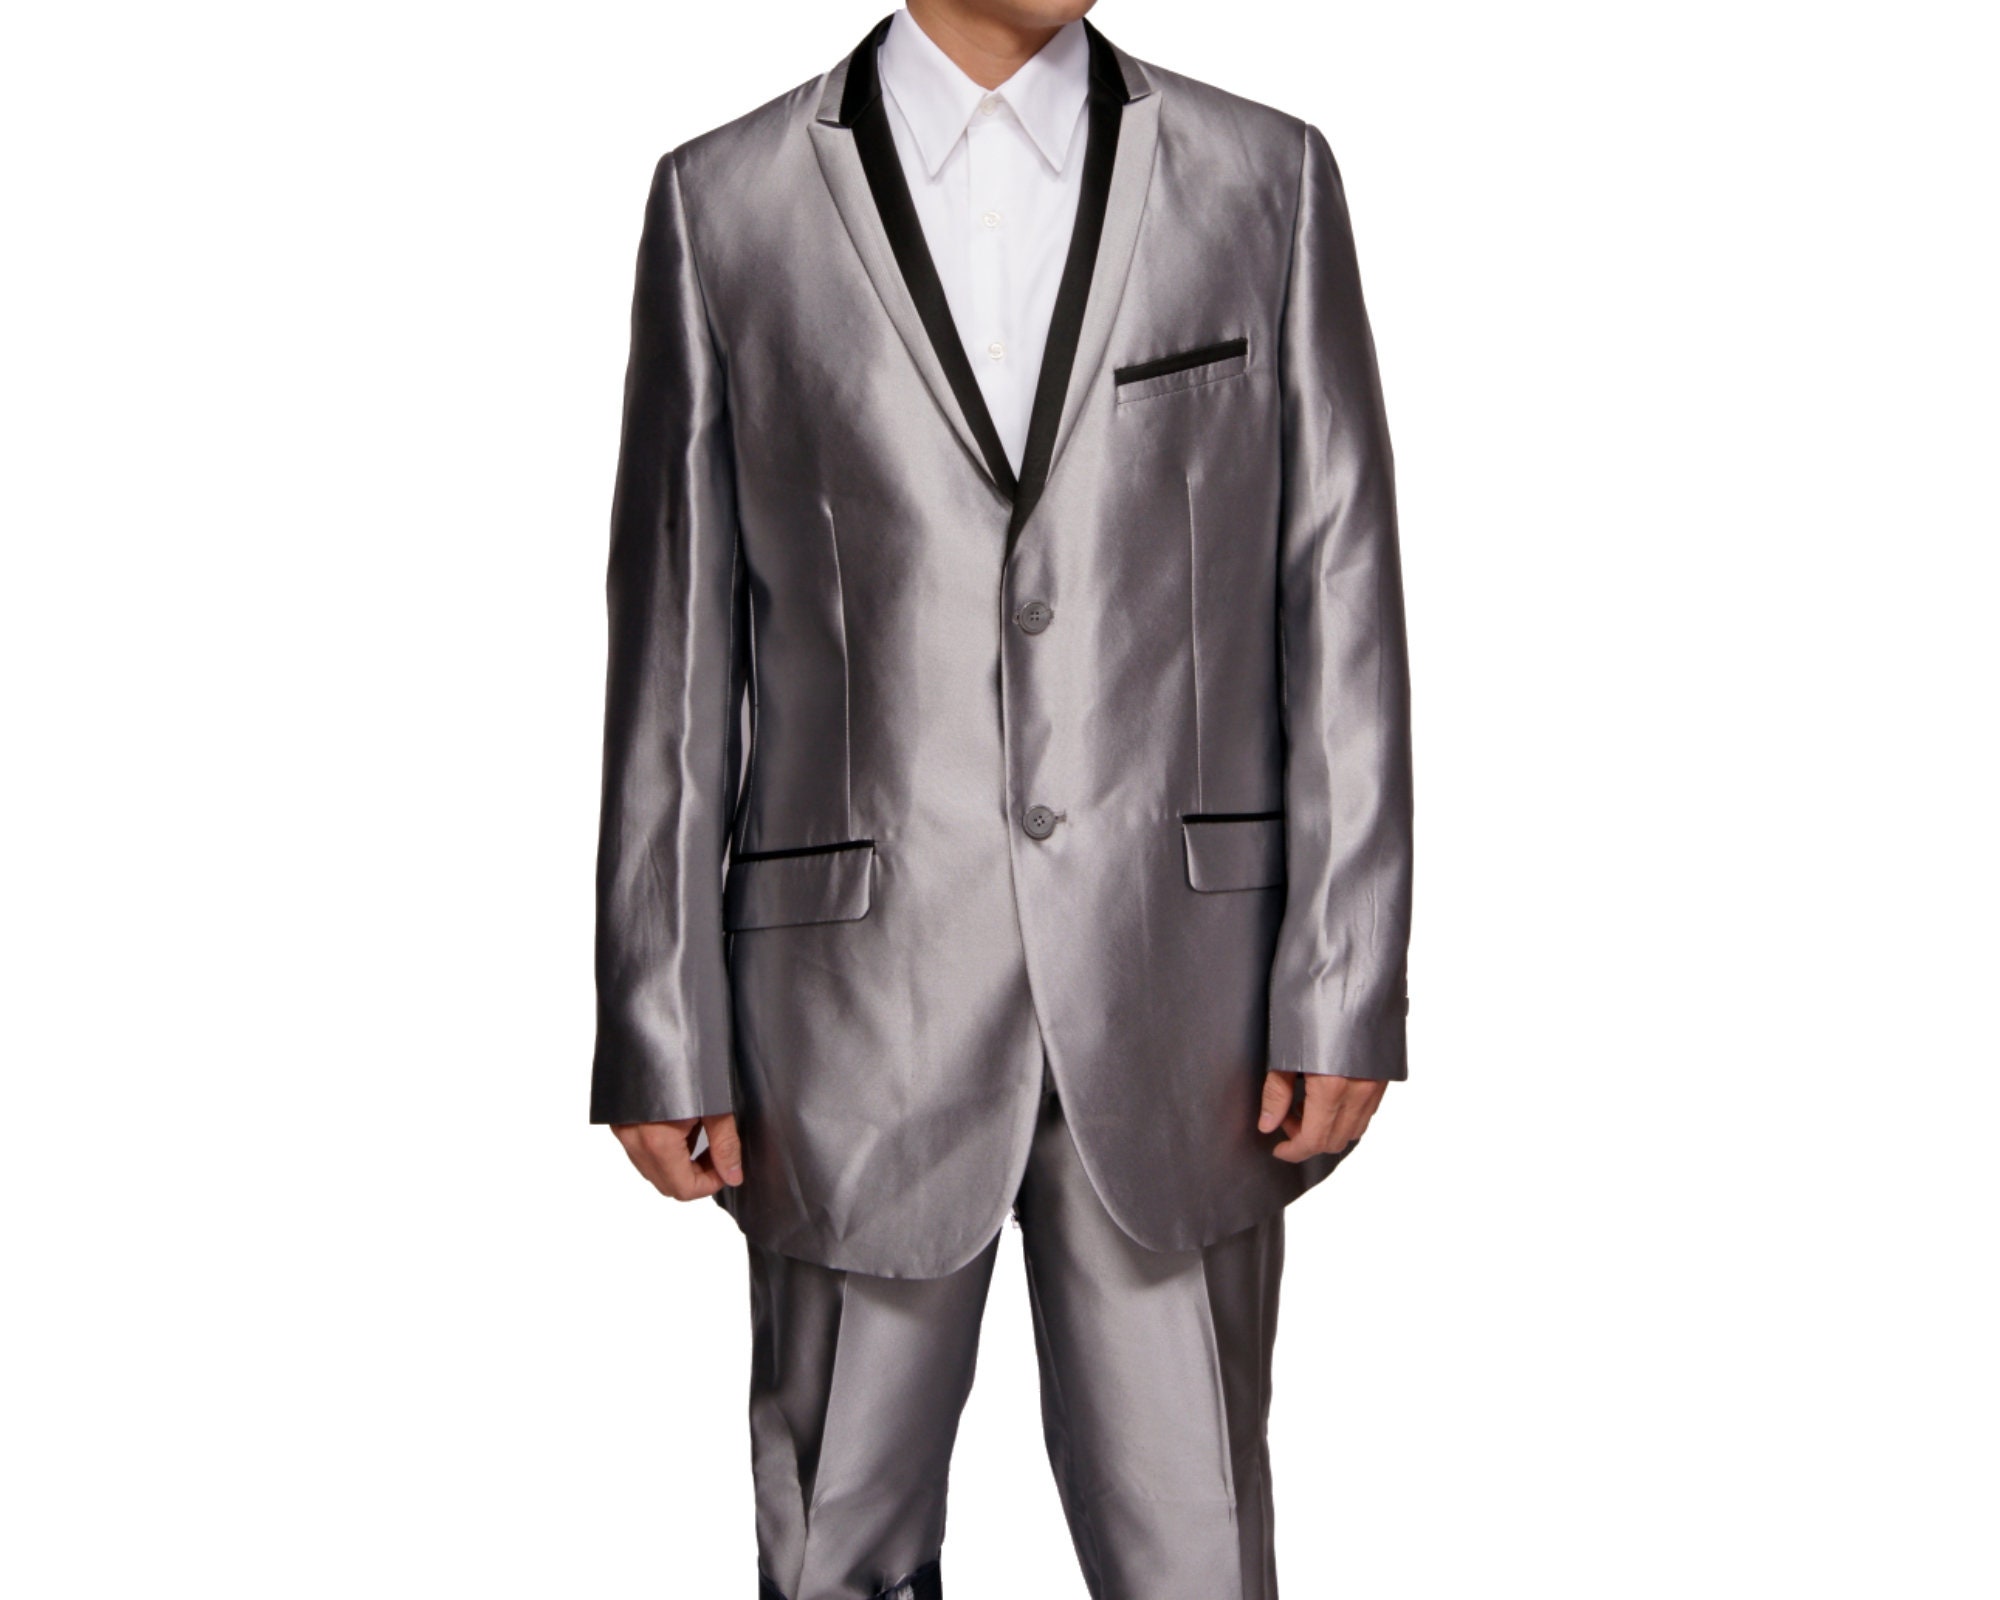 Buy LUXURAZI JHAMPSTEAD Silver Grey Magnetic Modern and Chic 2-Piece Suit  Set at Amazon.in